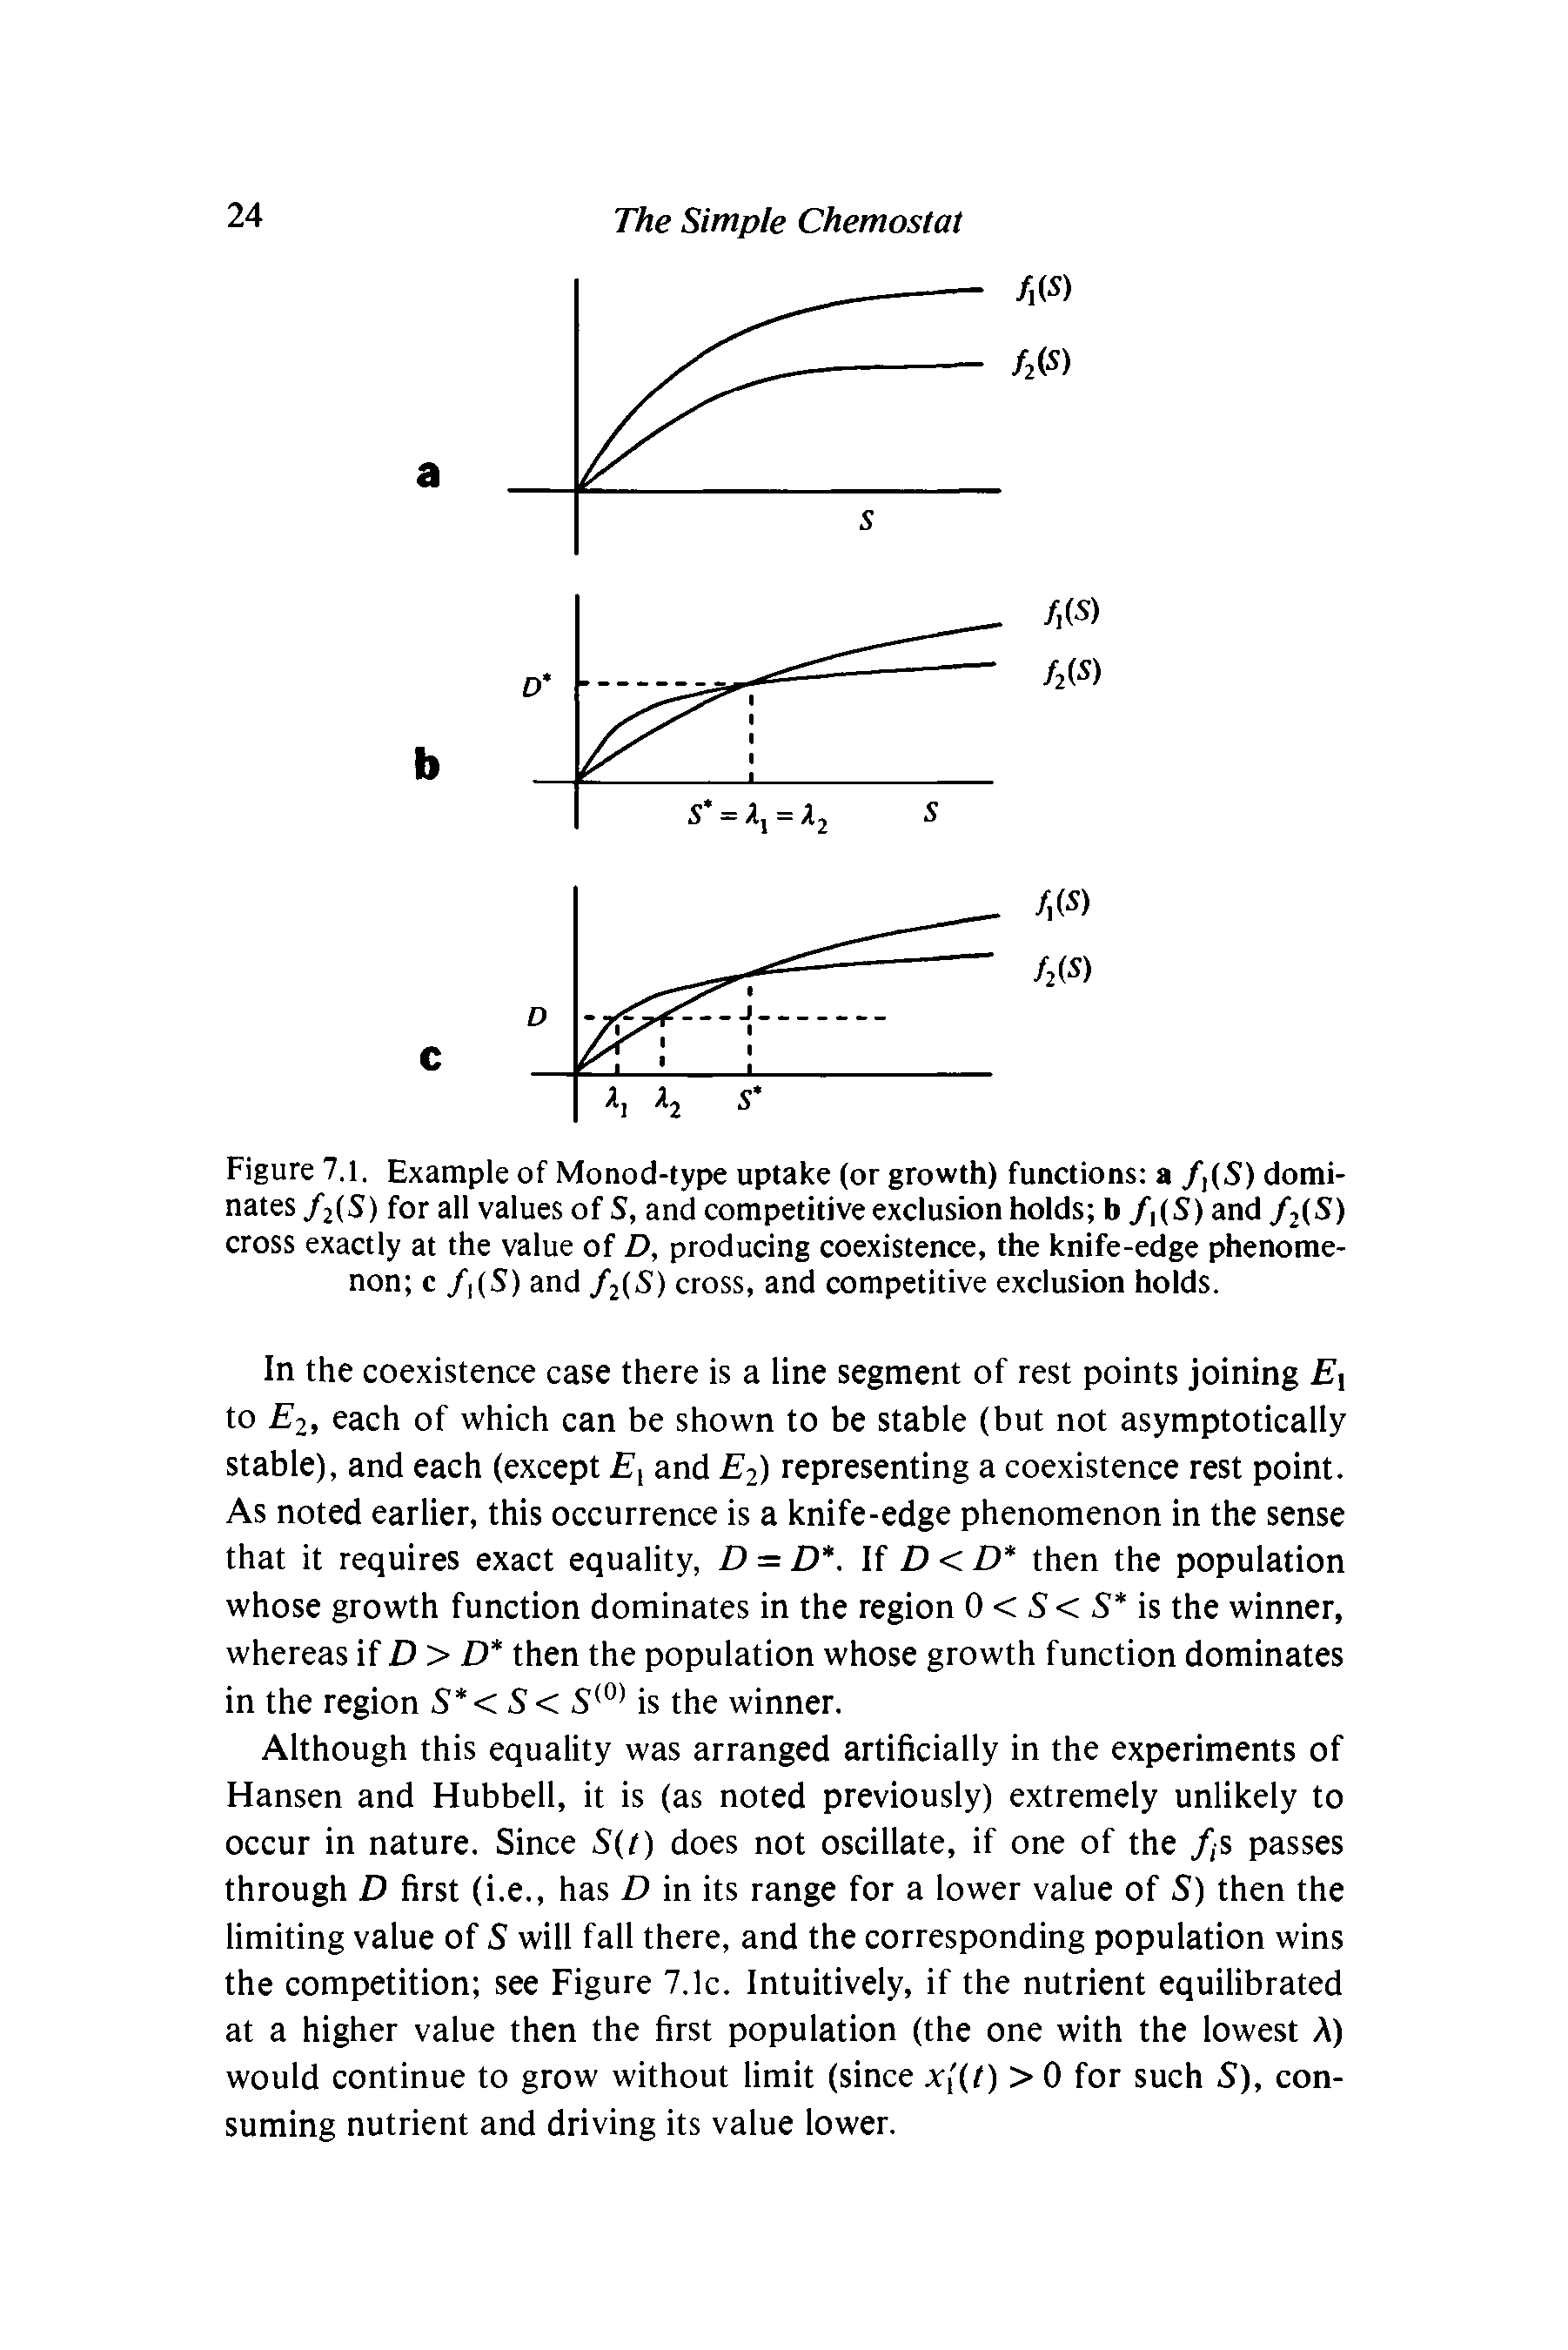 Figure 7.1. Example of Monod-type uptake (or growth) functions a /j(S) dominates/jlS) for all values of S, and competitive exclusion holds b /,(S) and fi S) cross exactly at the value of D, producing coexistence, the knife-edge phenomenon c / (S) and fi(S) cross, and competitive exclusion holds.